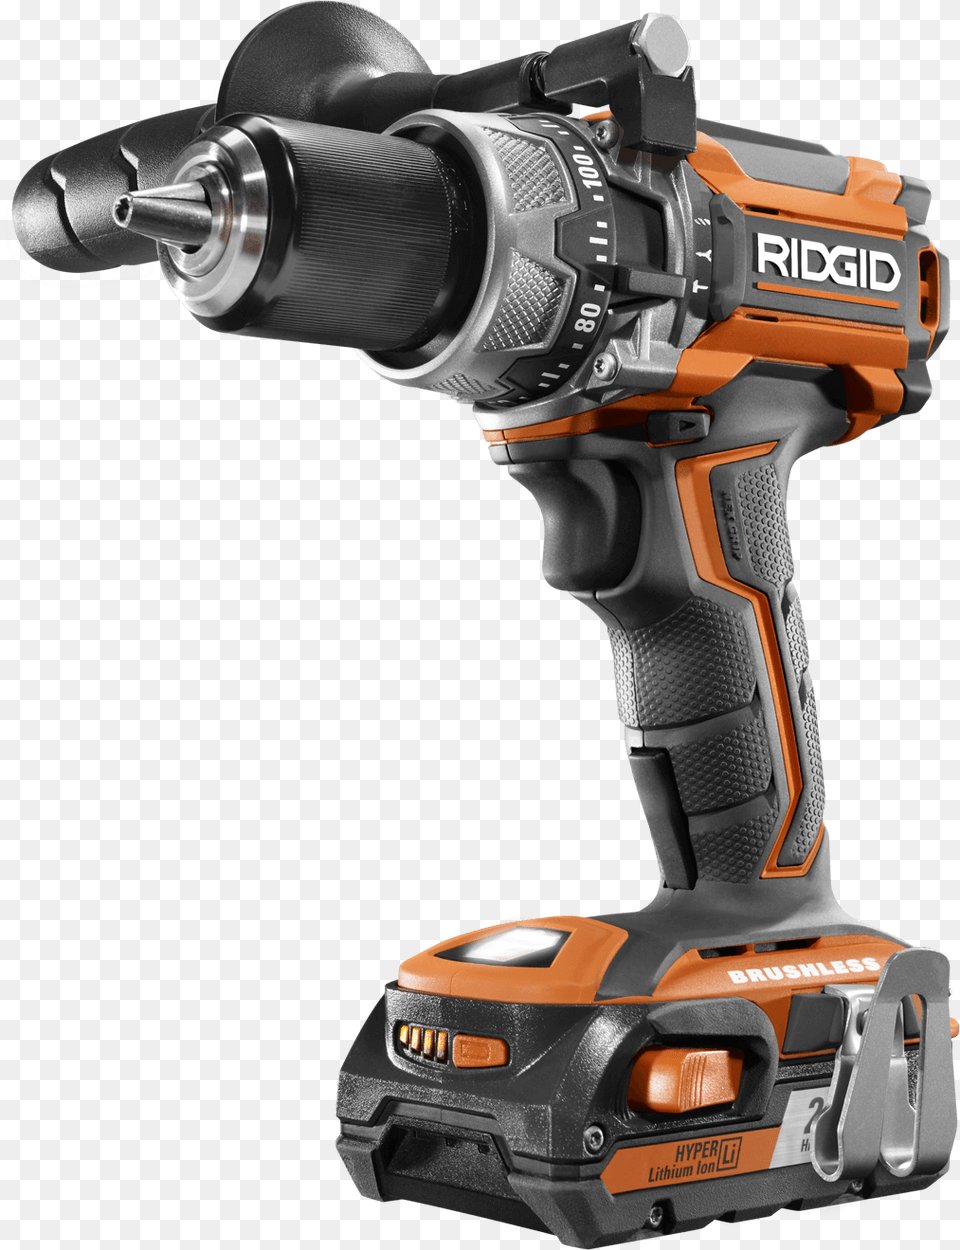 Up To 139 Value Ridgid Batteries And Charger, Device, Power Drill, Tool Free Png Download